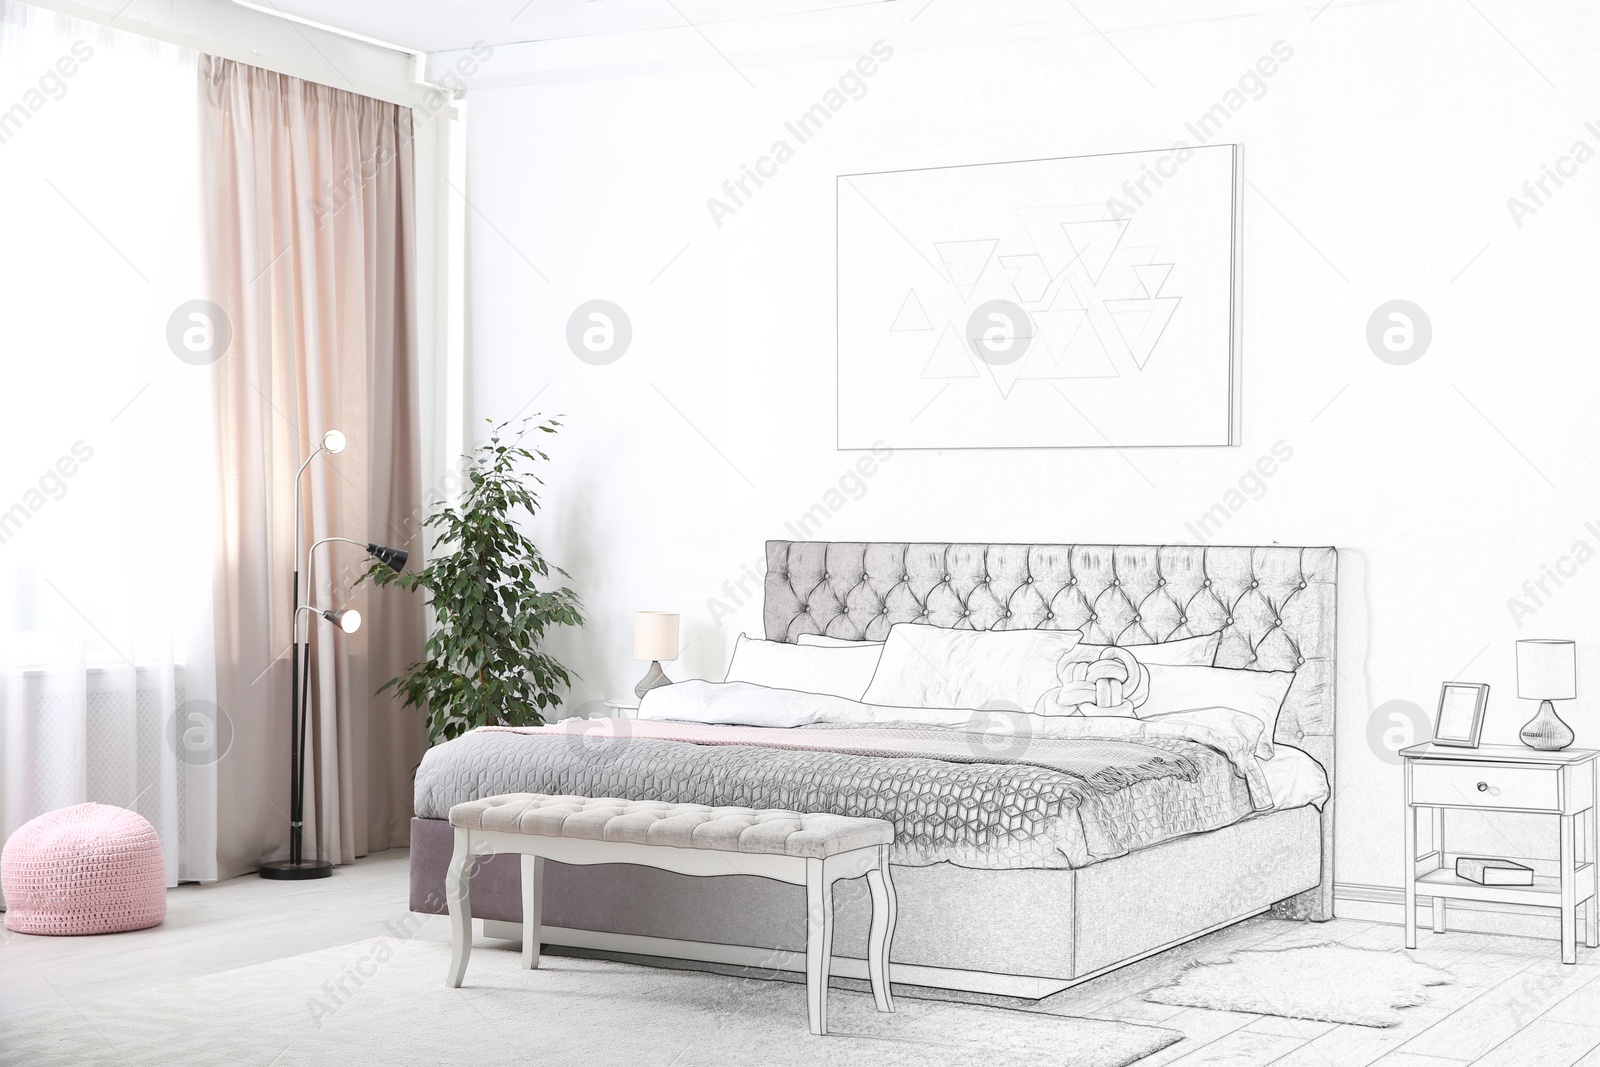 Image of Stylish bedroom interior with modern furniture. Combination of photo and sketch